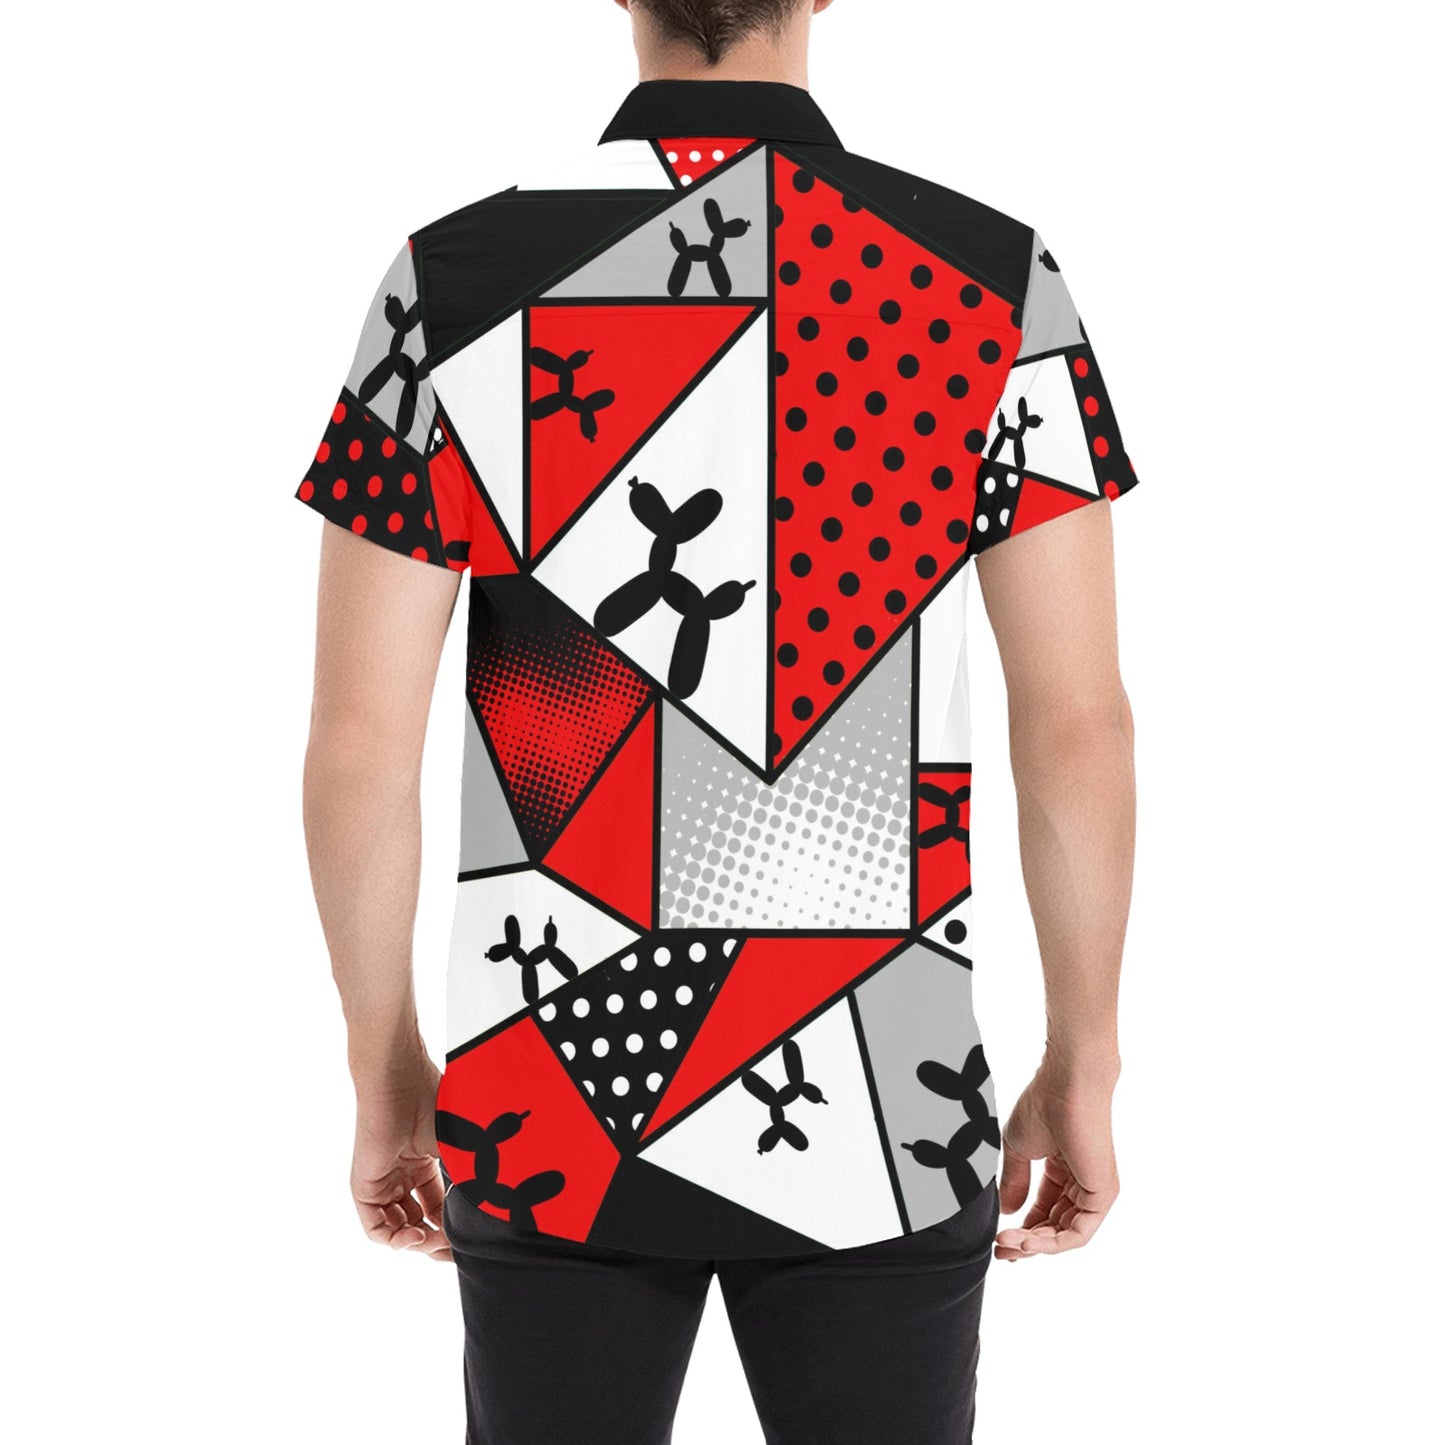 Face Painter shirt with balloon dogs red, black and white